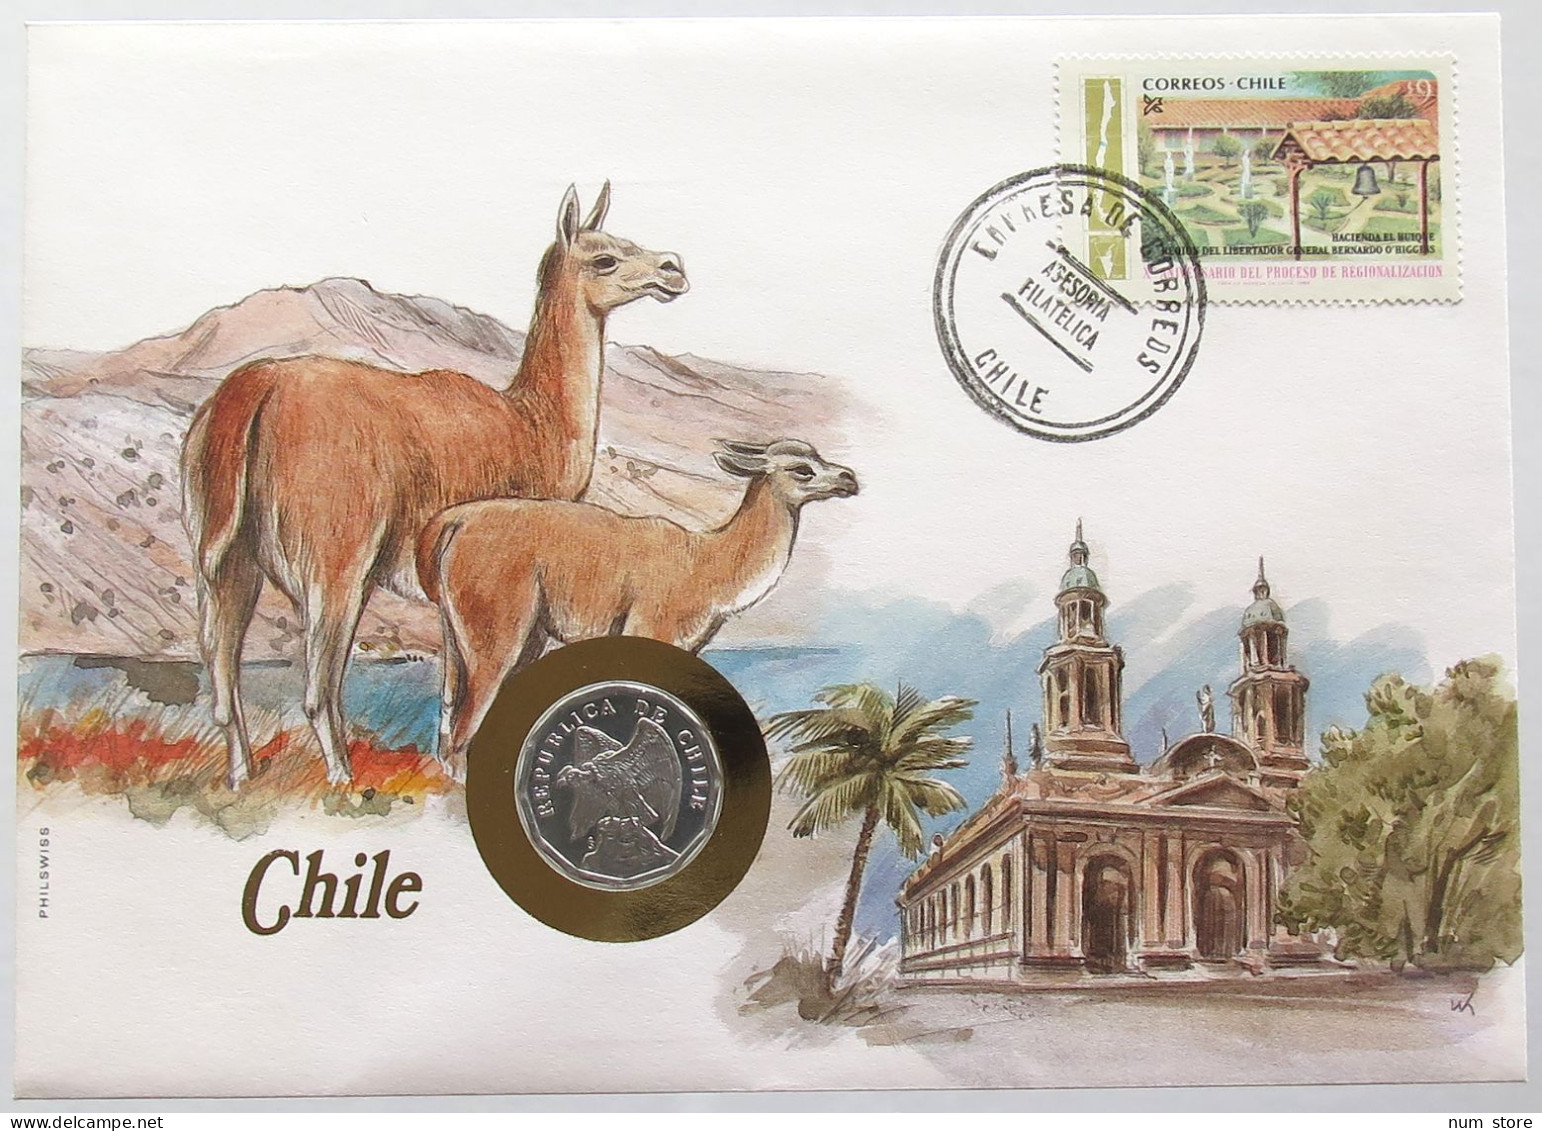 CHILE STATIONERY 10 CENTAVOS 1979  #bs18 0069 - Chili